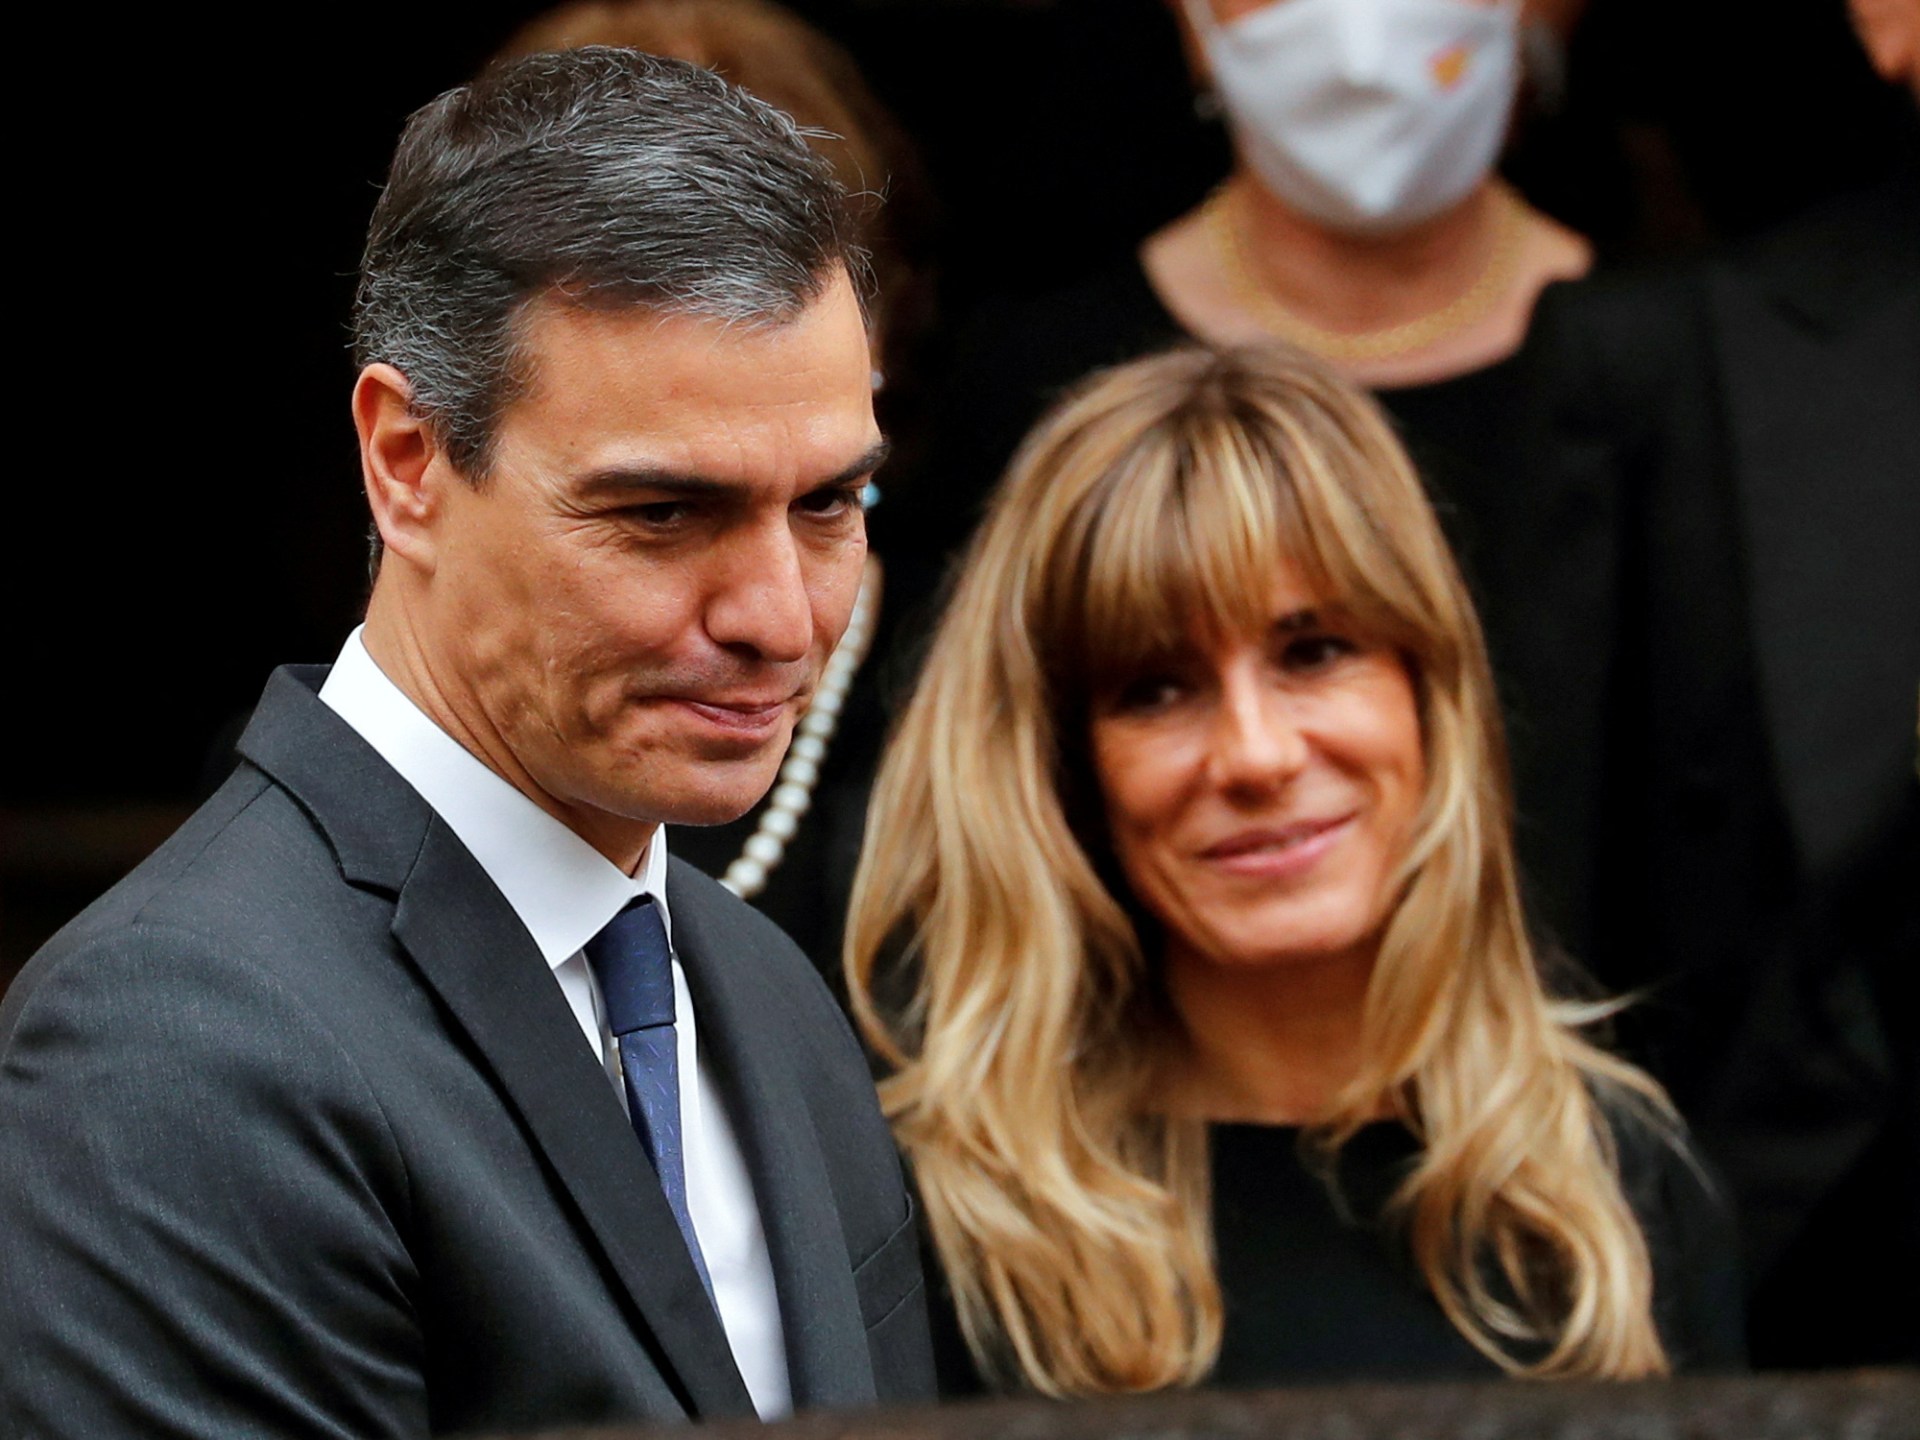 Spanish government decries ‘mudslinging campaign’ as PM’s wife summoned | Politics News